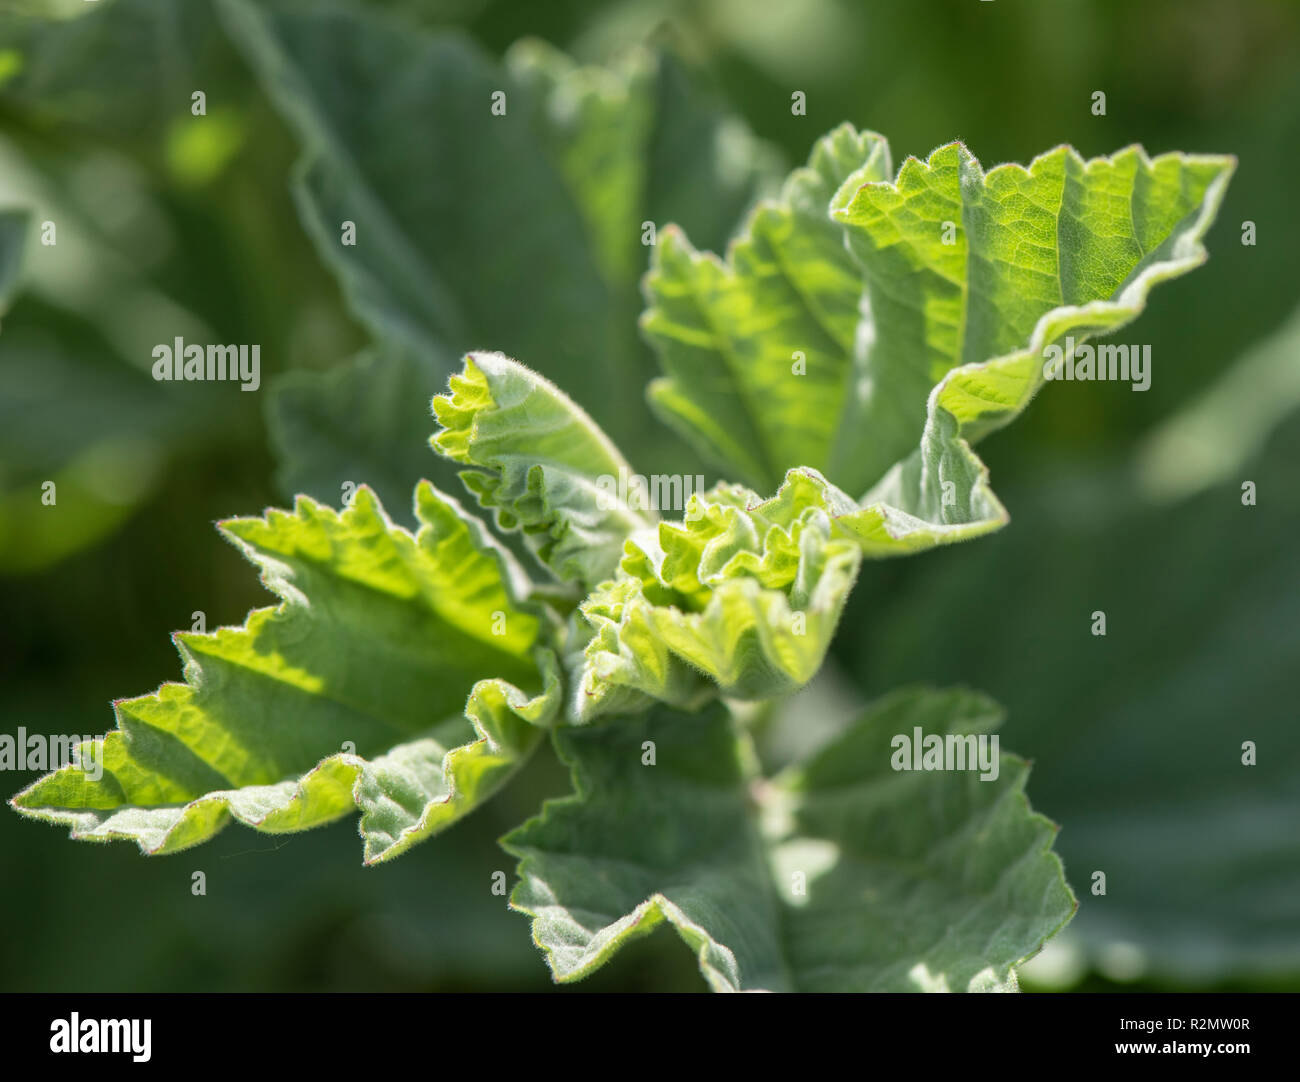 Marshmallow as a medicinal plant for natural medicine and herbal medicine Stock Photo